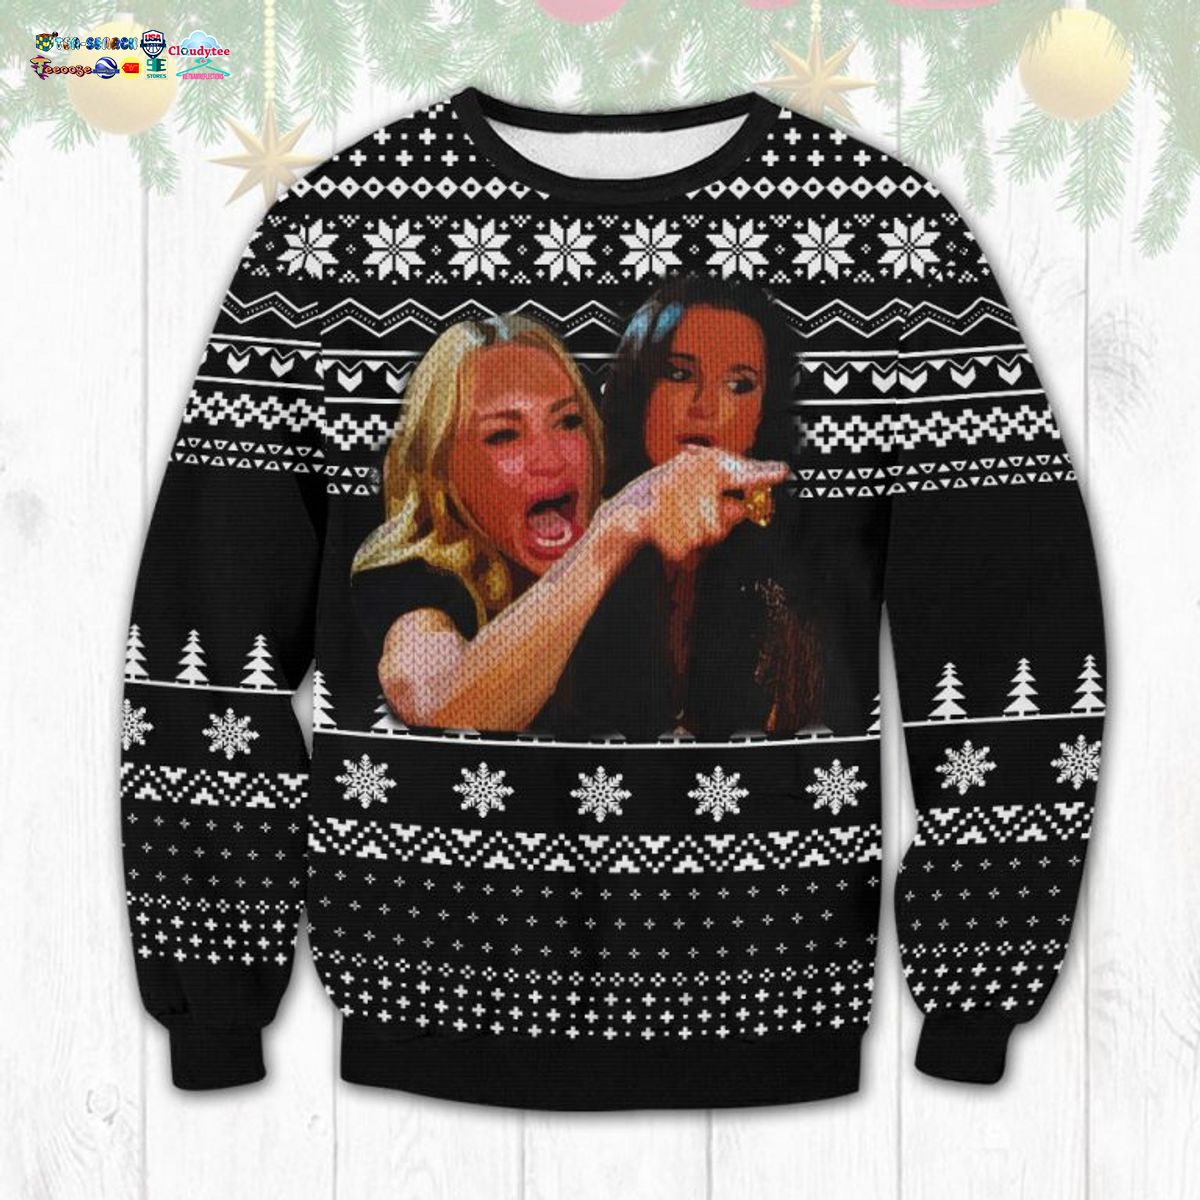 Woman Yelling At A Cat Meme Ugly Christmas Sweater